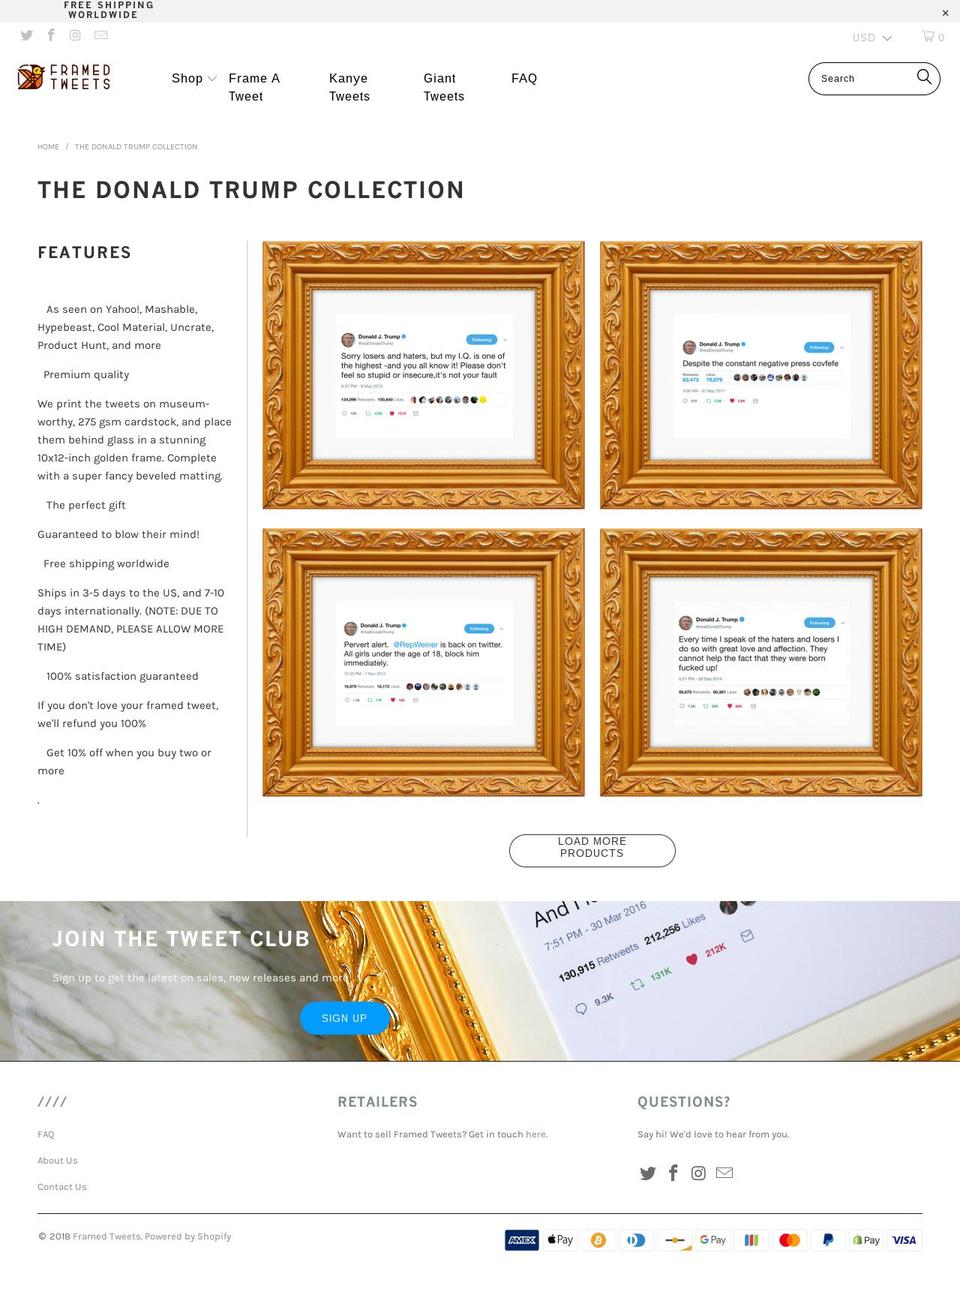 Editorial Shopify theme site example framedtrumptweets.com